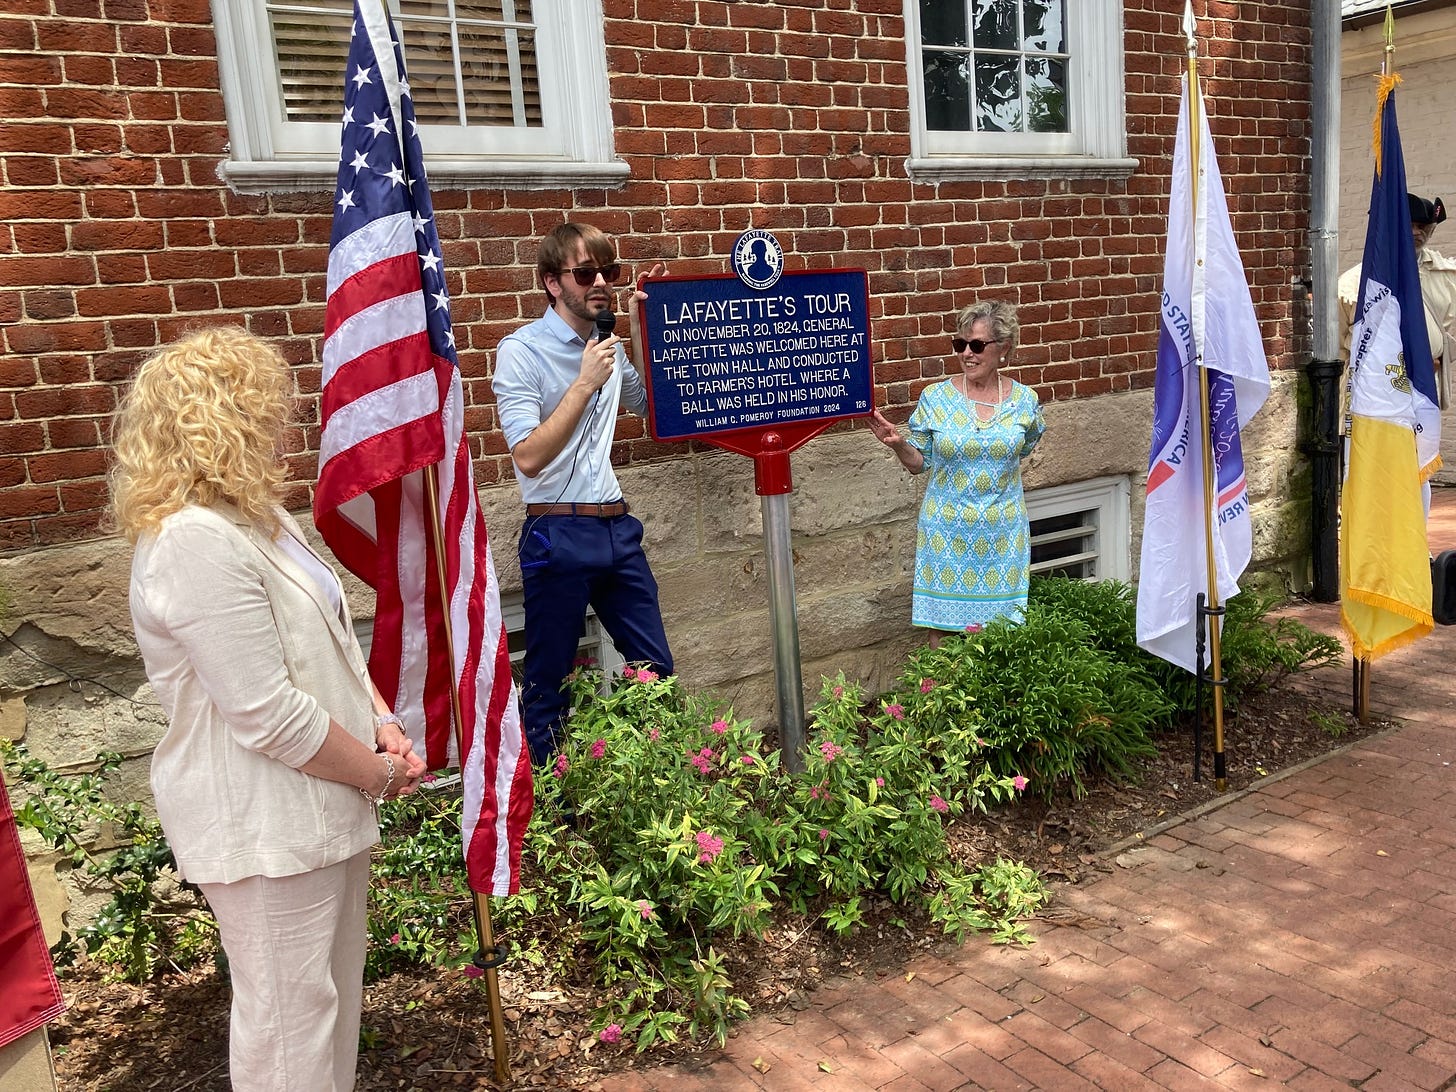 Julien Icher speaks following the unveiling of a historic marker commemorating Lafayette's 1824 visit to Fredericksburg on May 23,